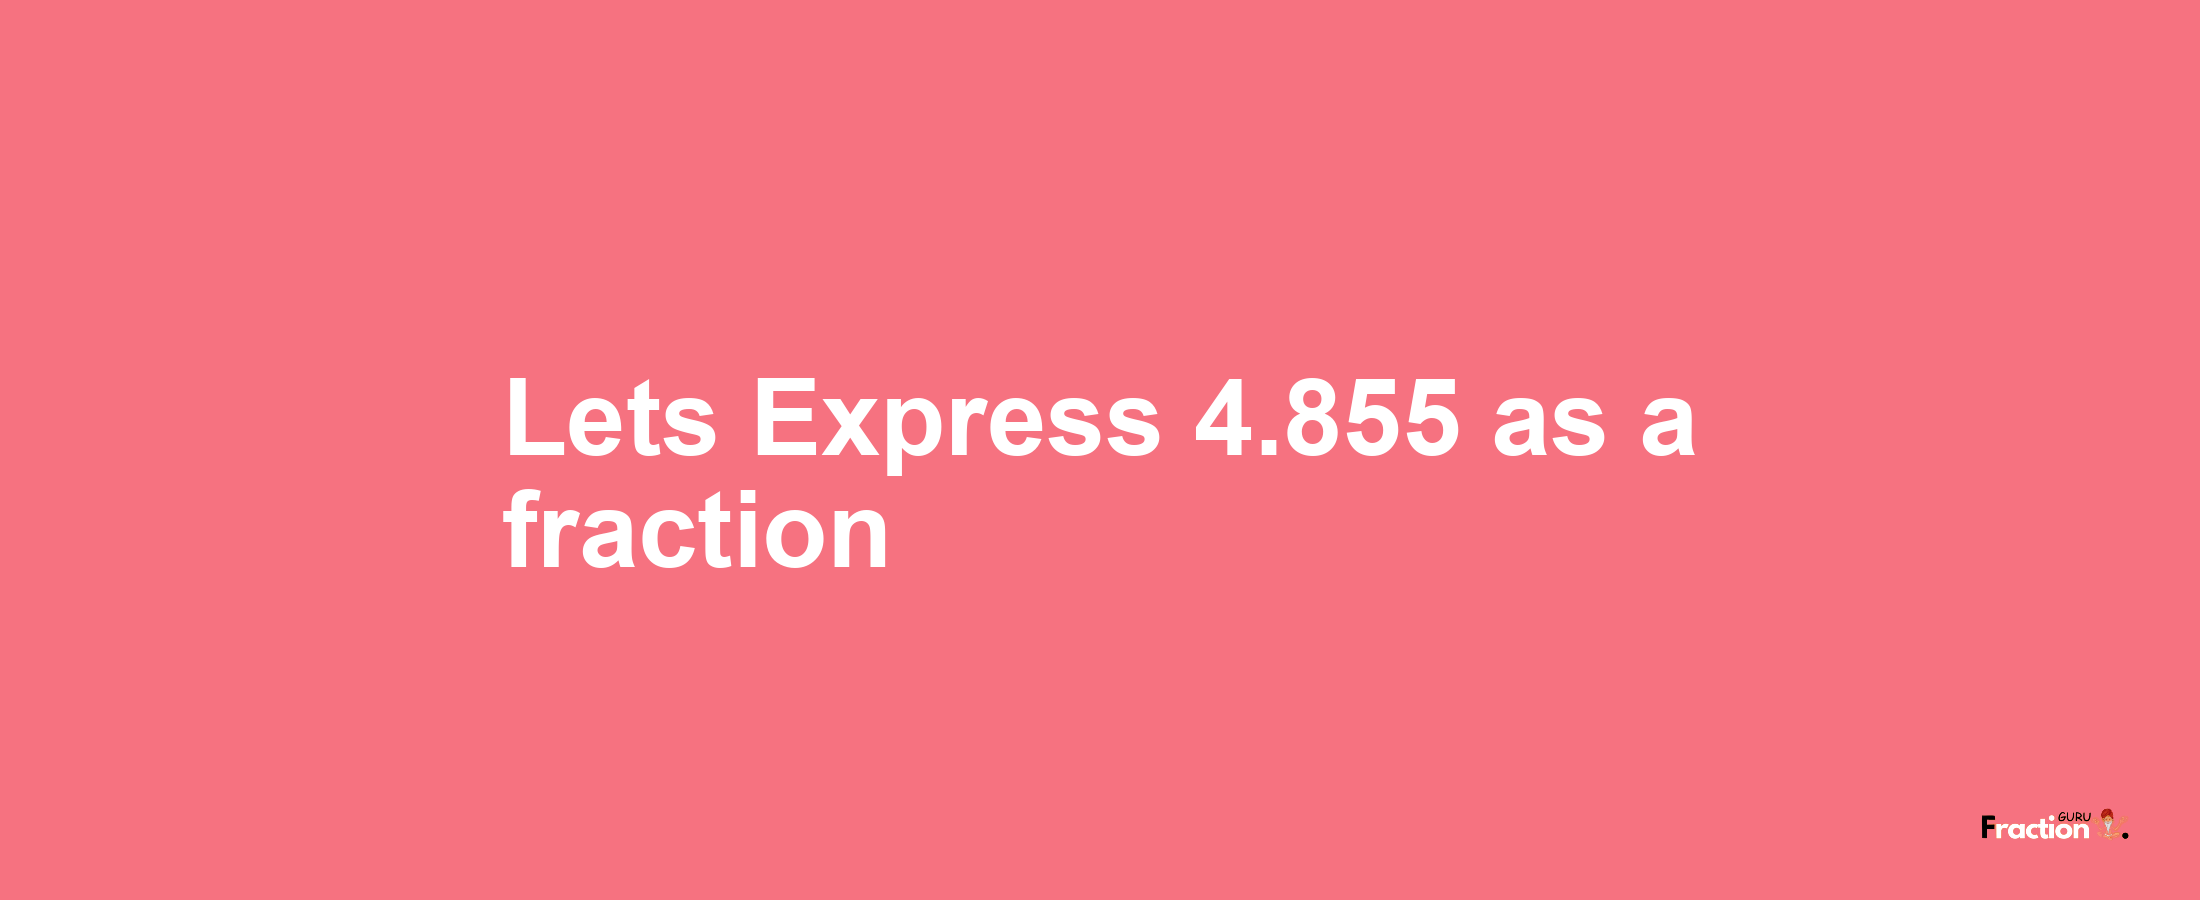 Lets Express 4.855 as afraction